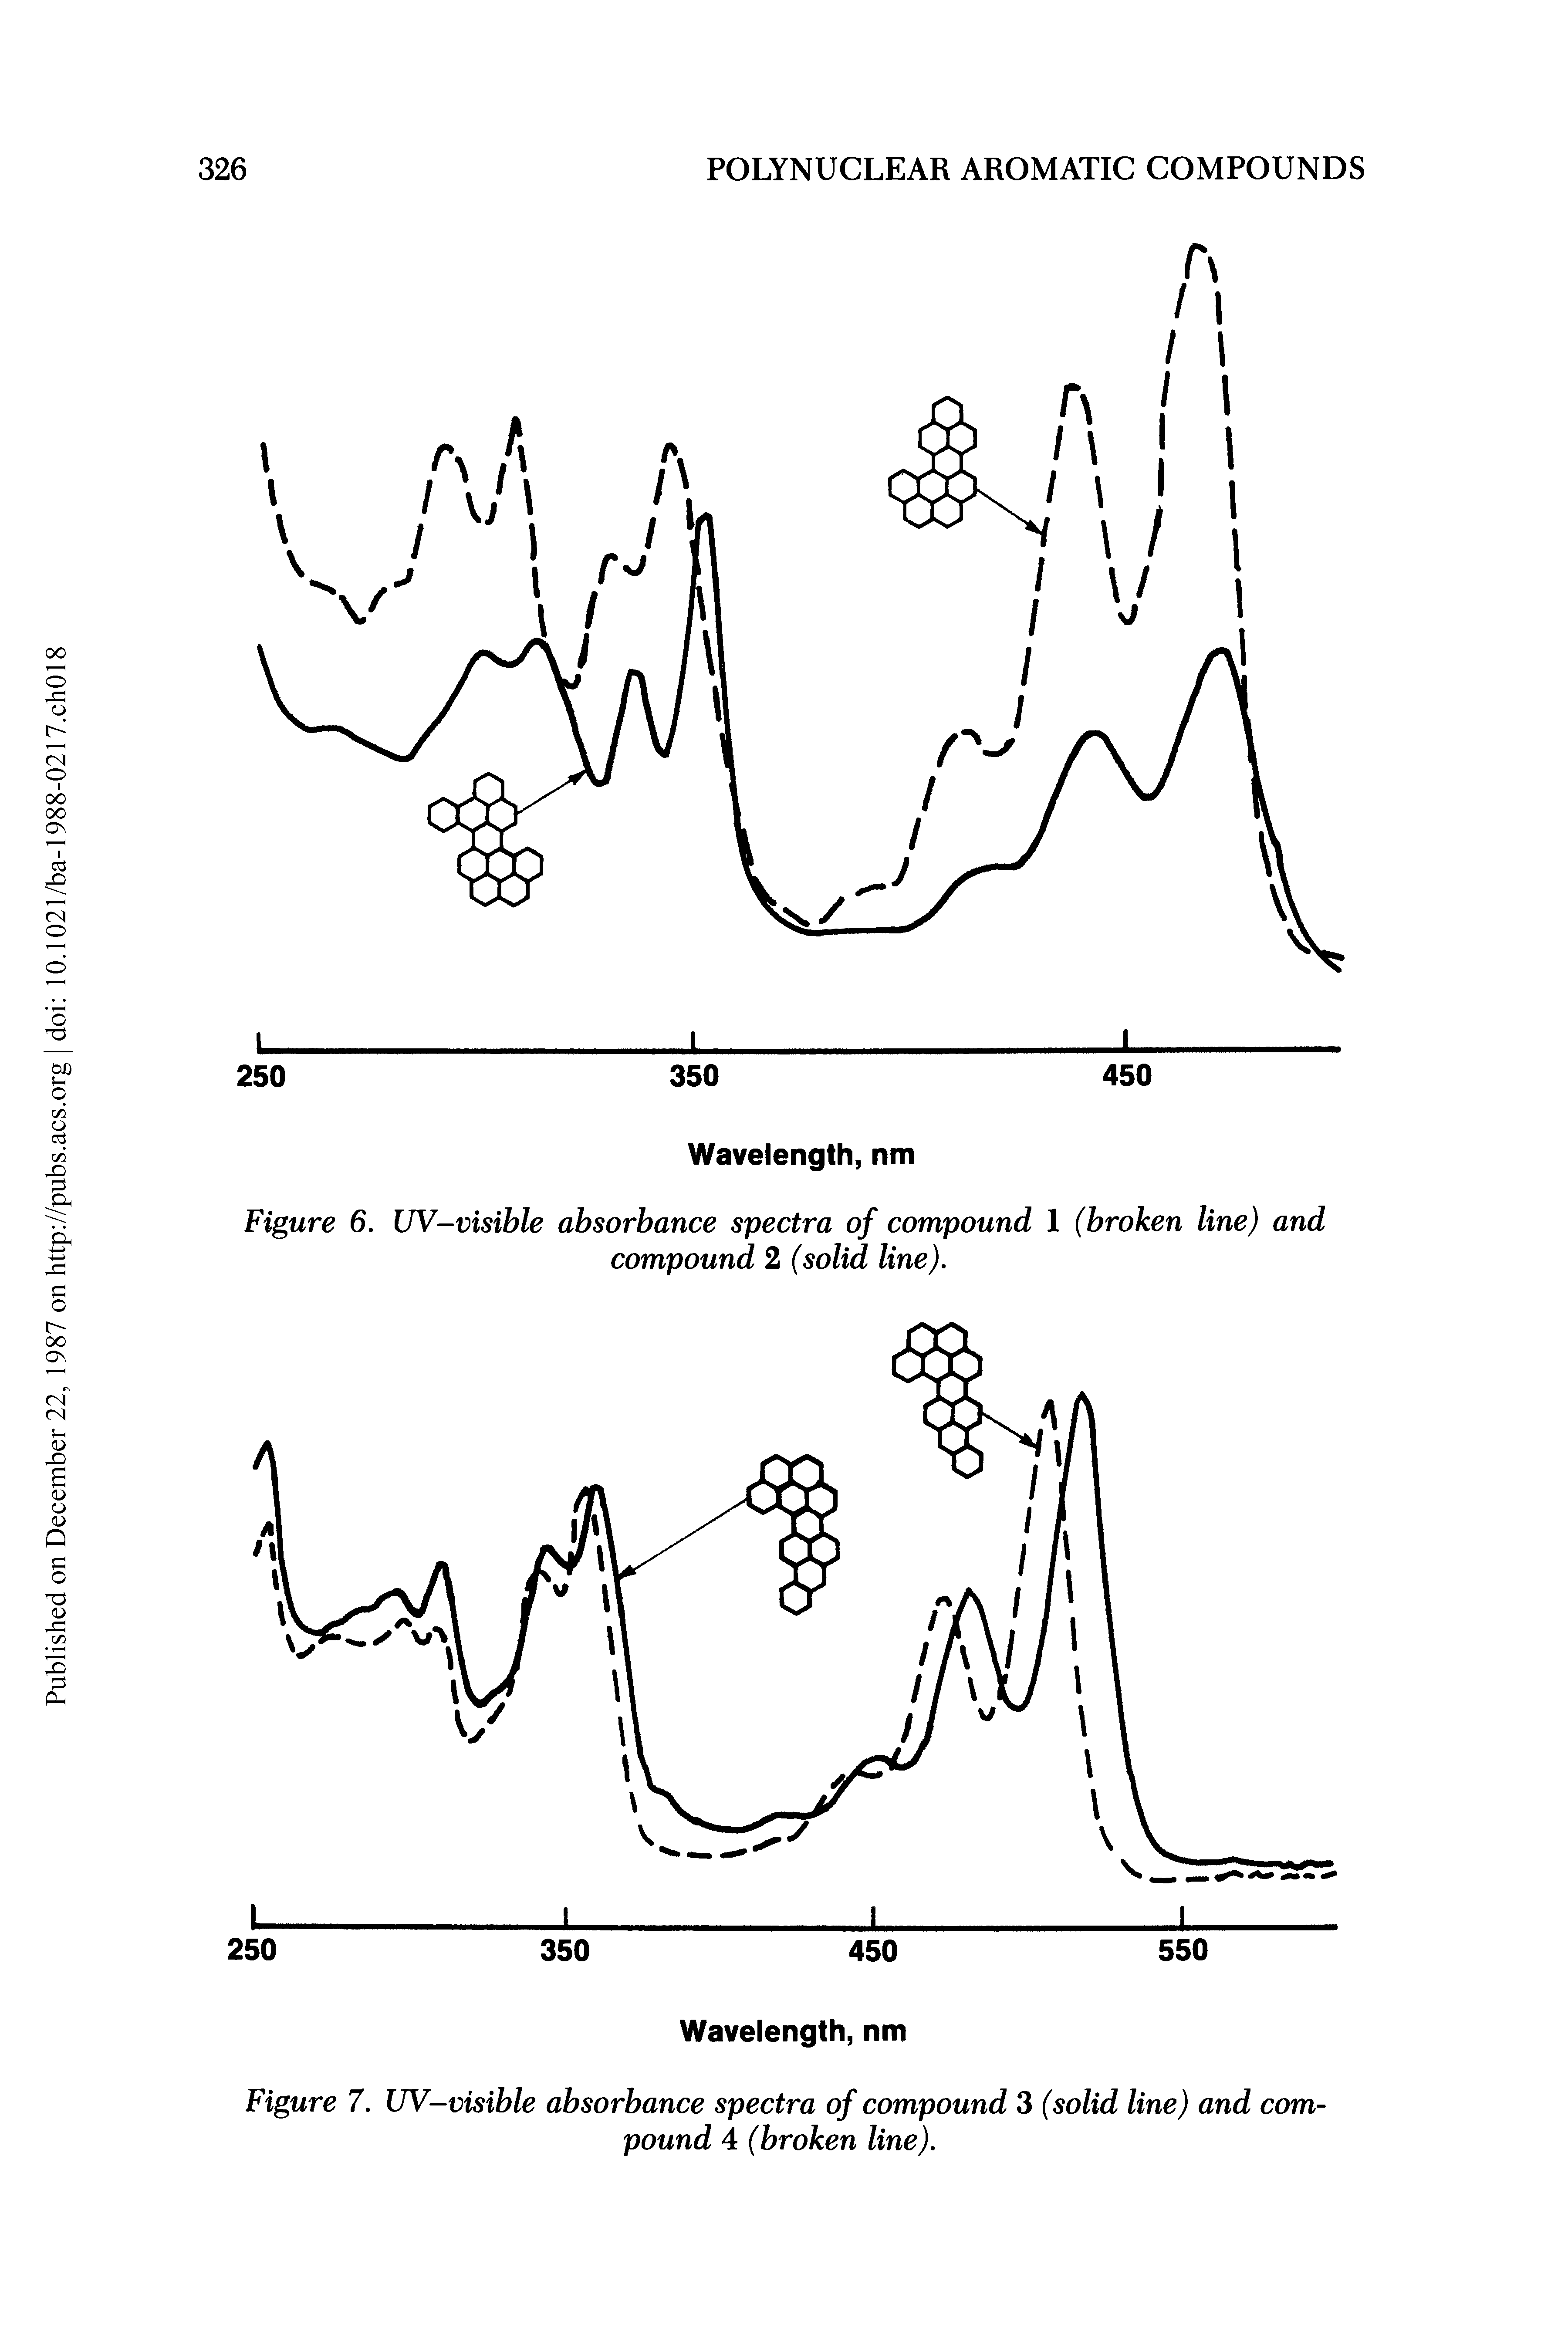 Figure 6. UV-visible absorbance spectra of compound 1 (broken line) and compound 2 (solid line).